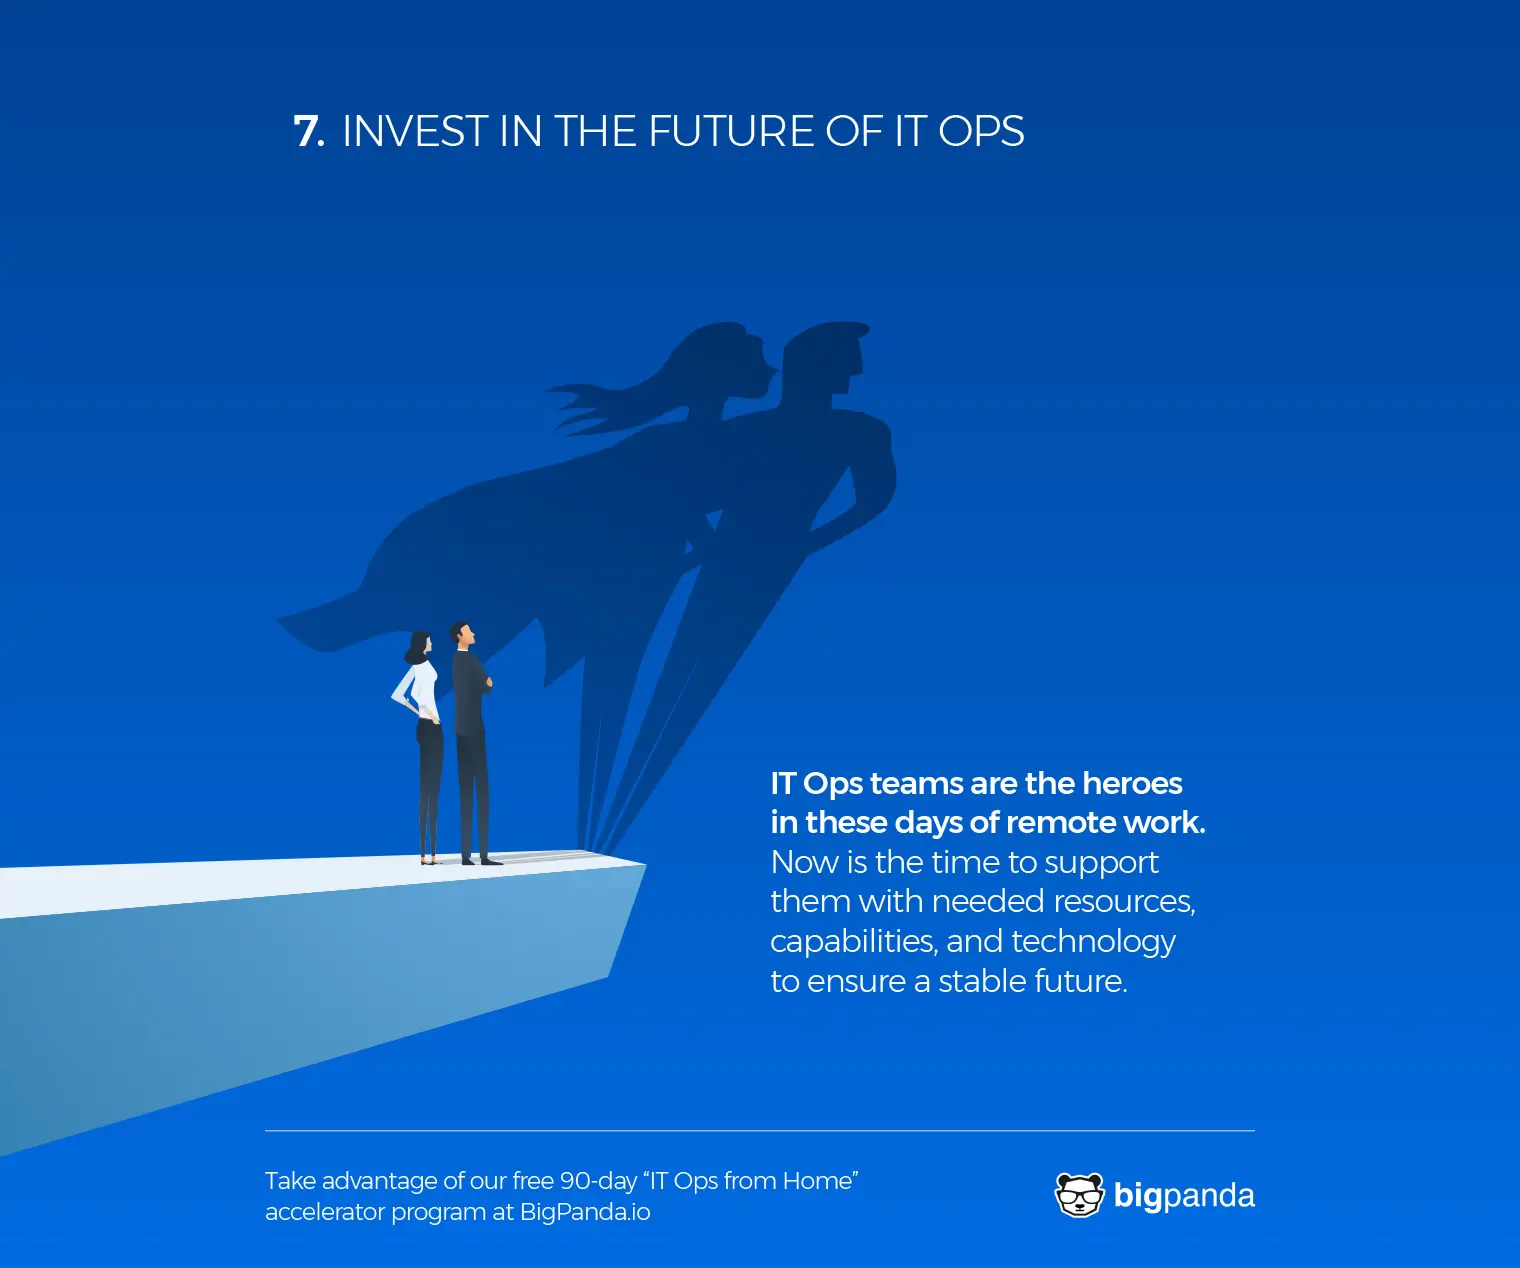 7. Invest in the Future of IT Ops